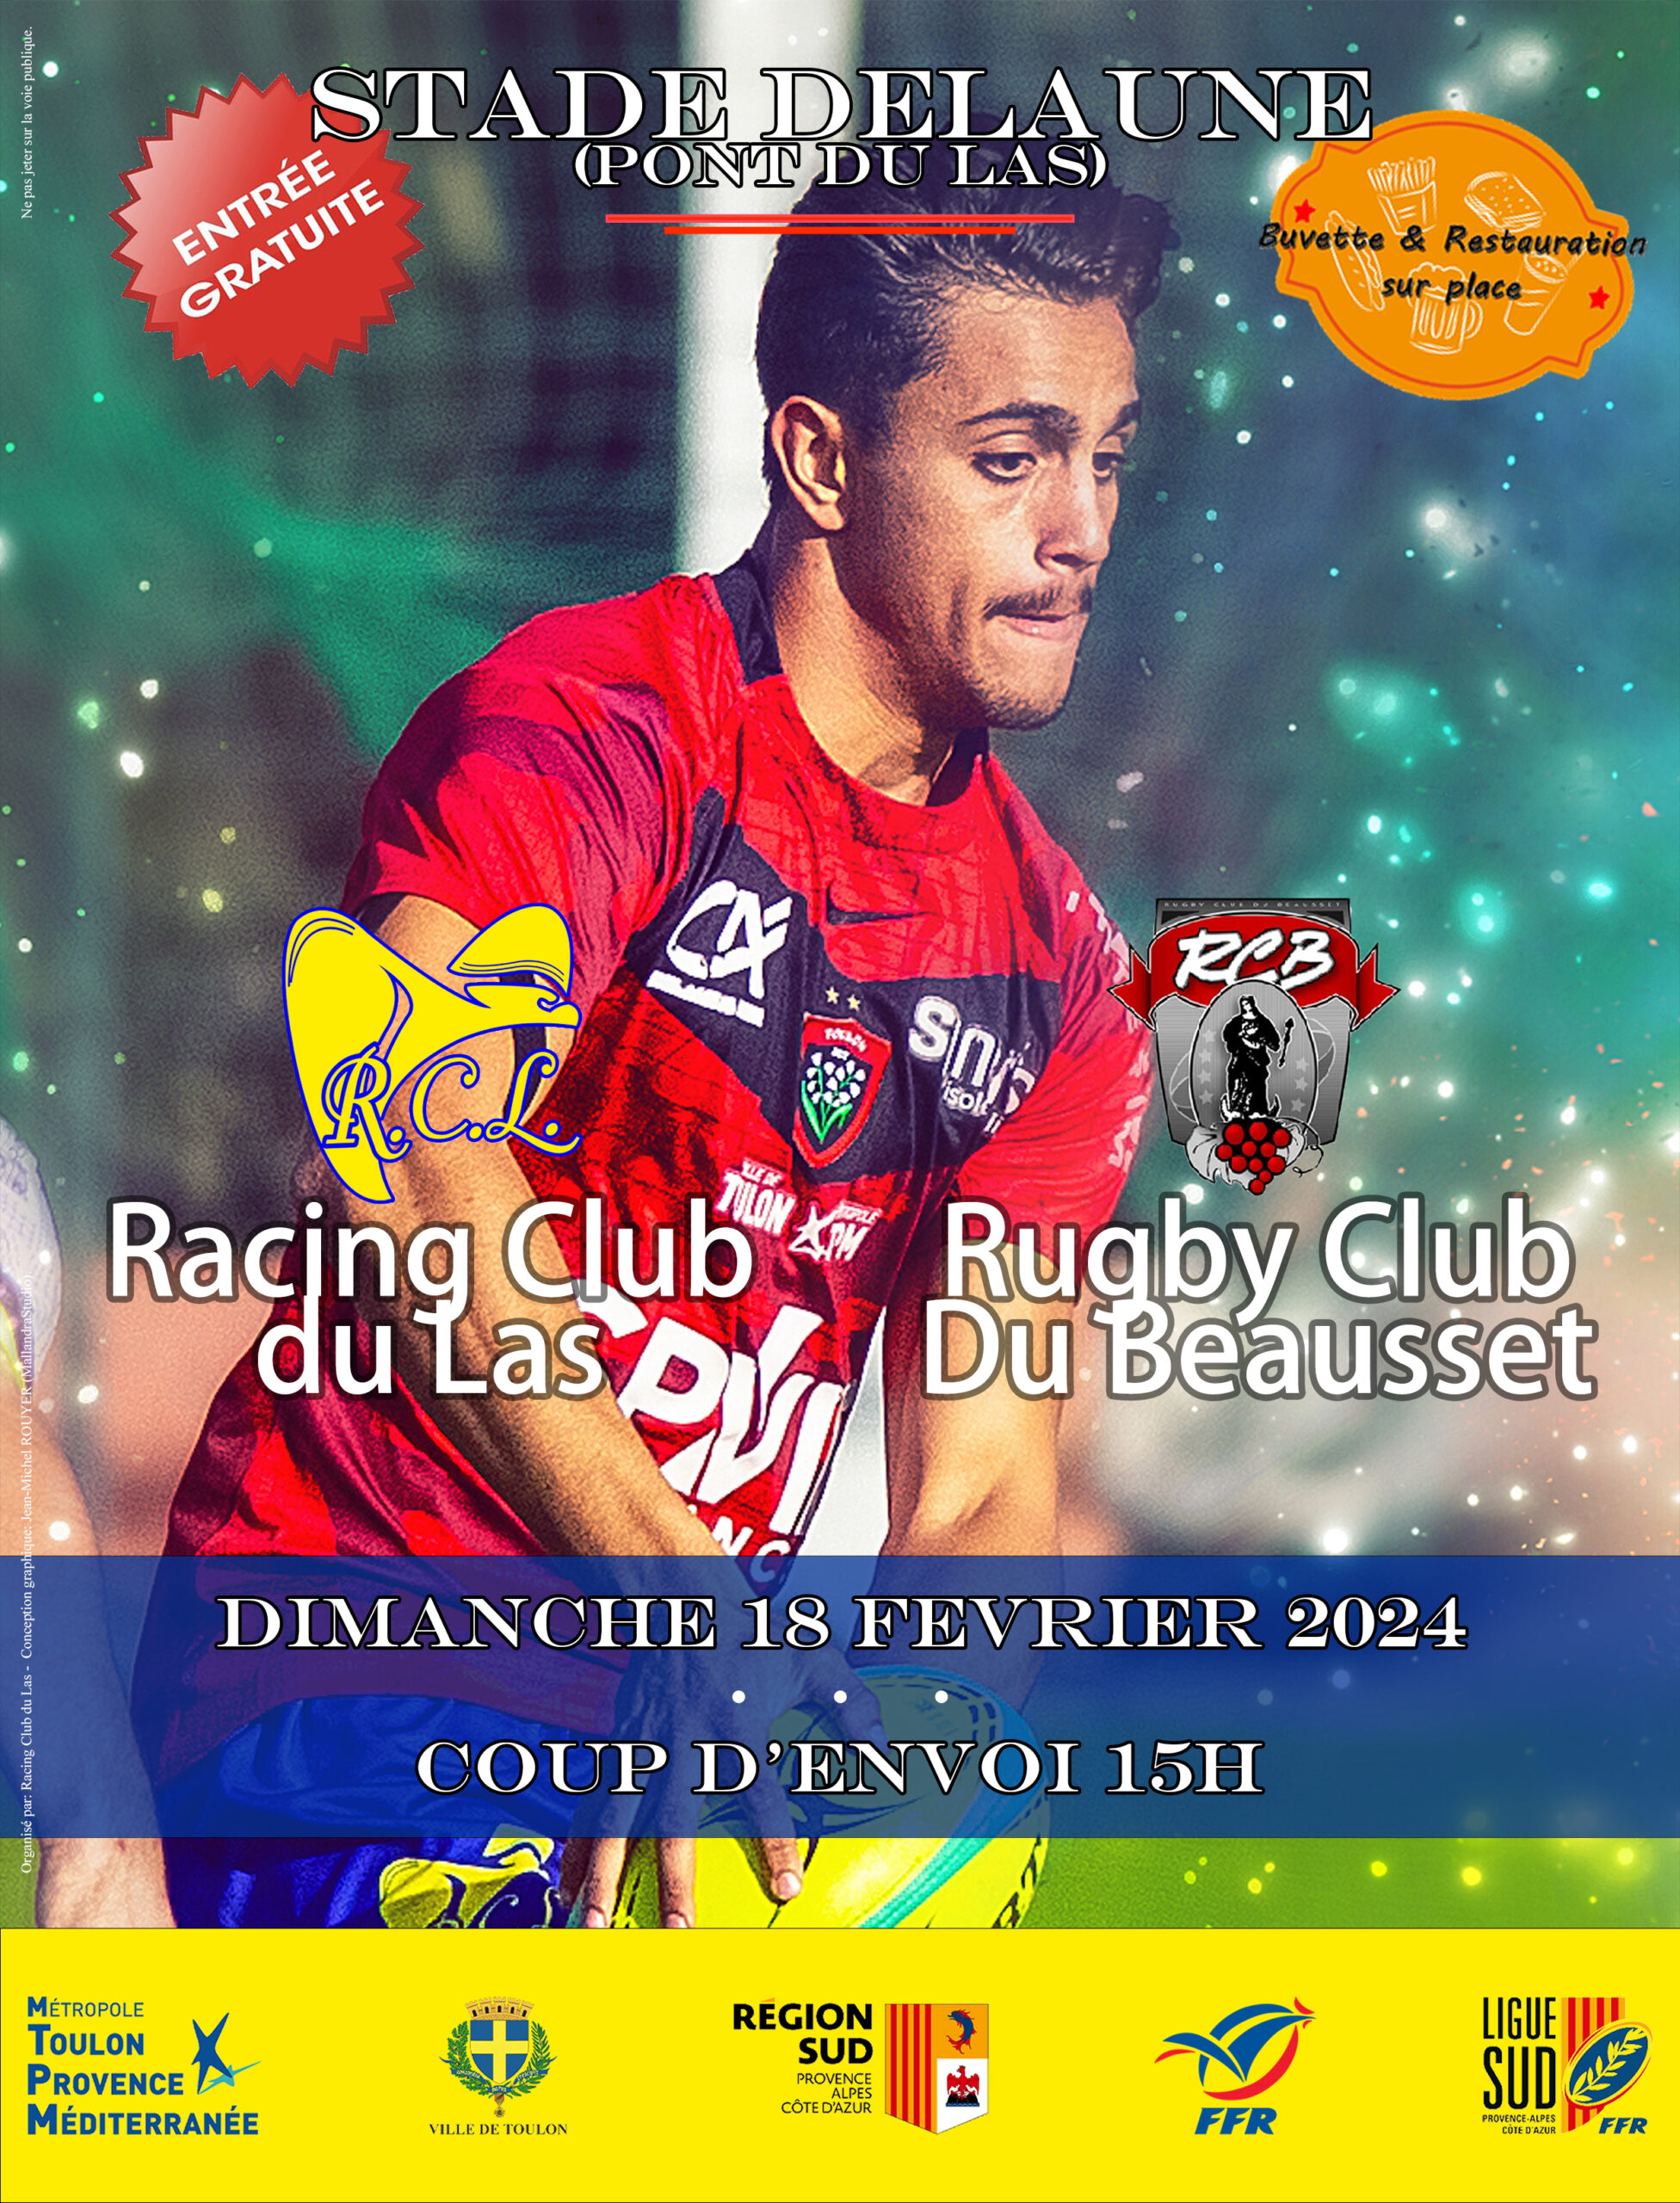 Featured image for “Réception Rugby du Beausset”